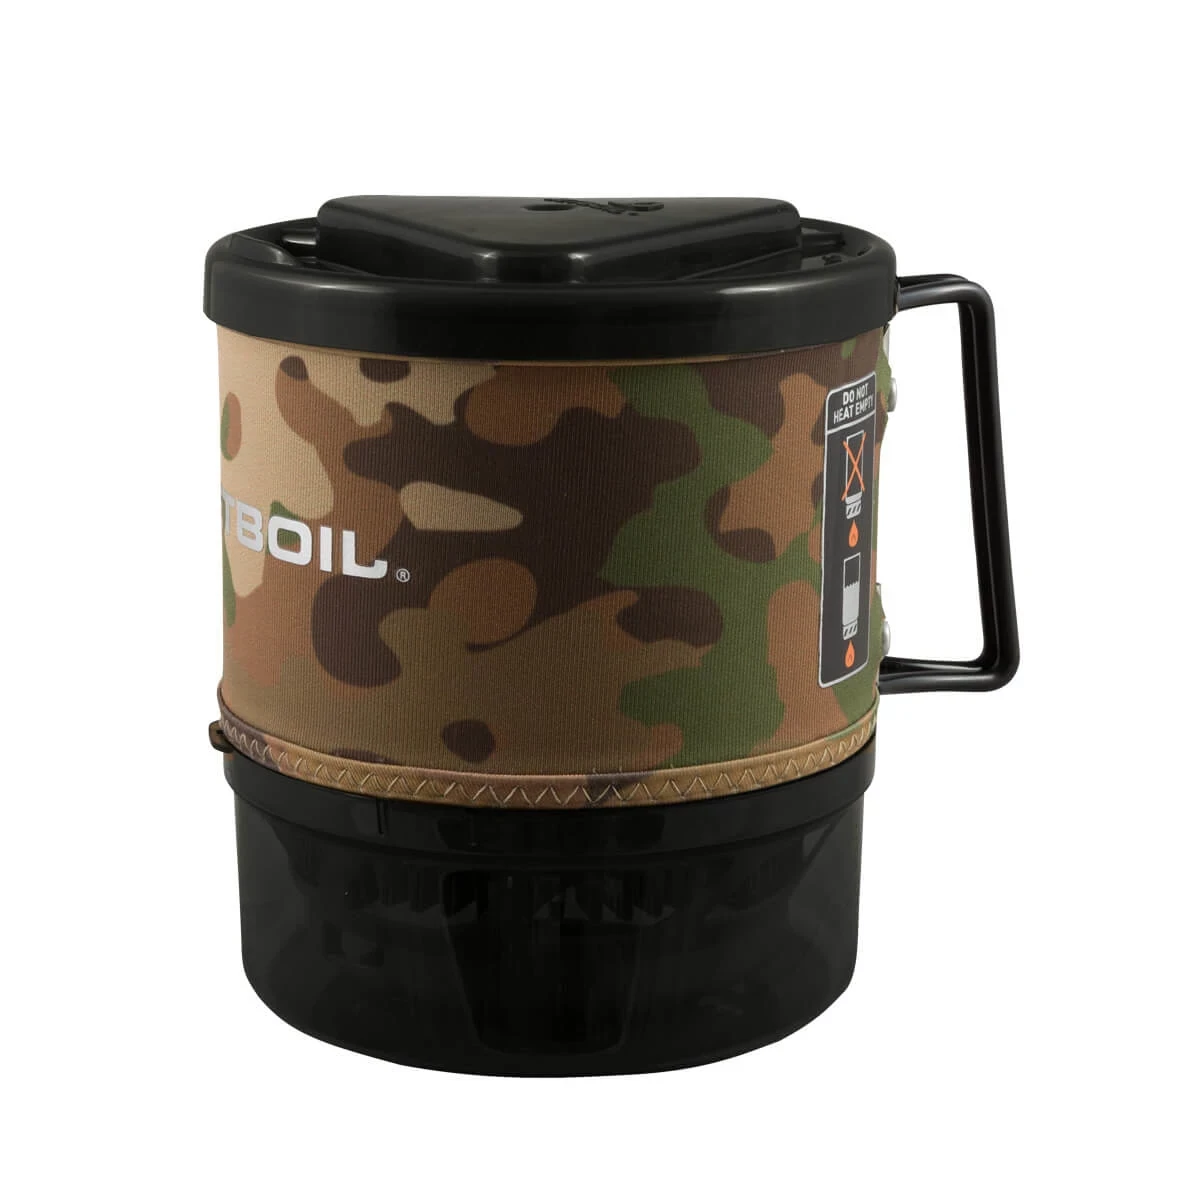 MiniMo Cooking System - Camo packed